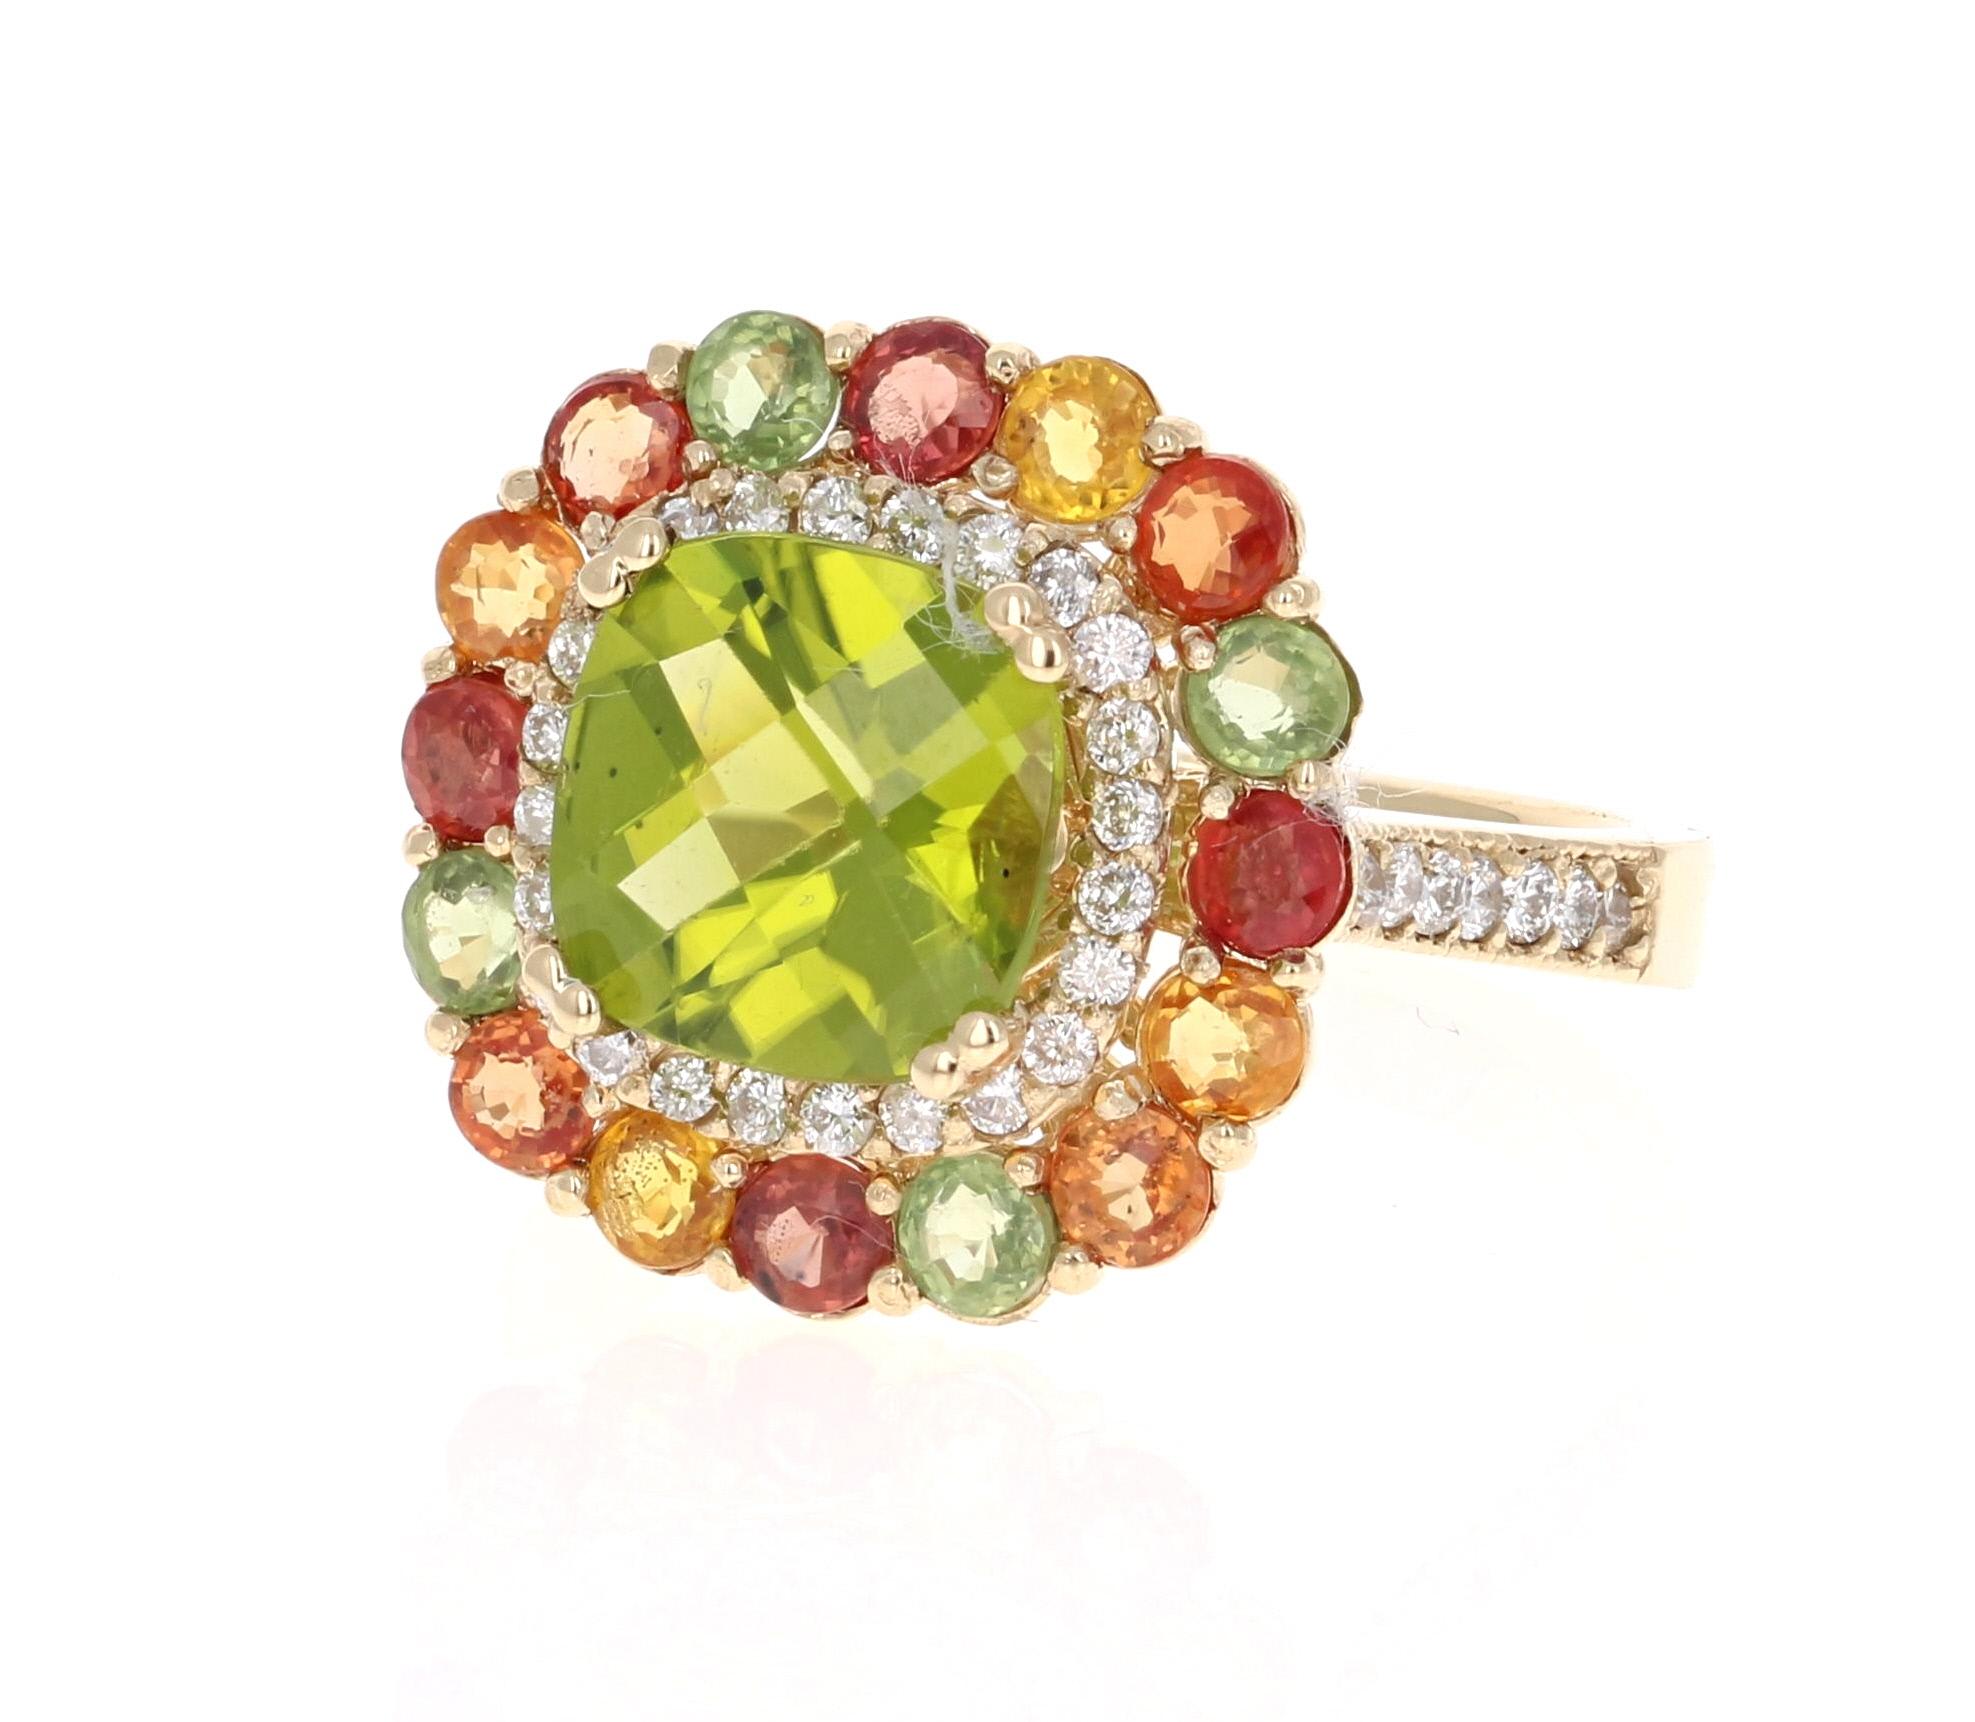 Uniquely Designed into a Masterpiece! 

This beautiful ring has a Cushion Cut Peridot that weighs 2.85 Carats. The ring is surrounded by 38 Round Cut Diamonds that weigh 0.45 Carats (Clarity: SI, Color: F) and also 16 Multi Colored Sapphires that